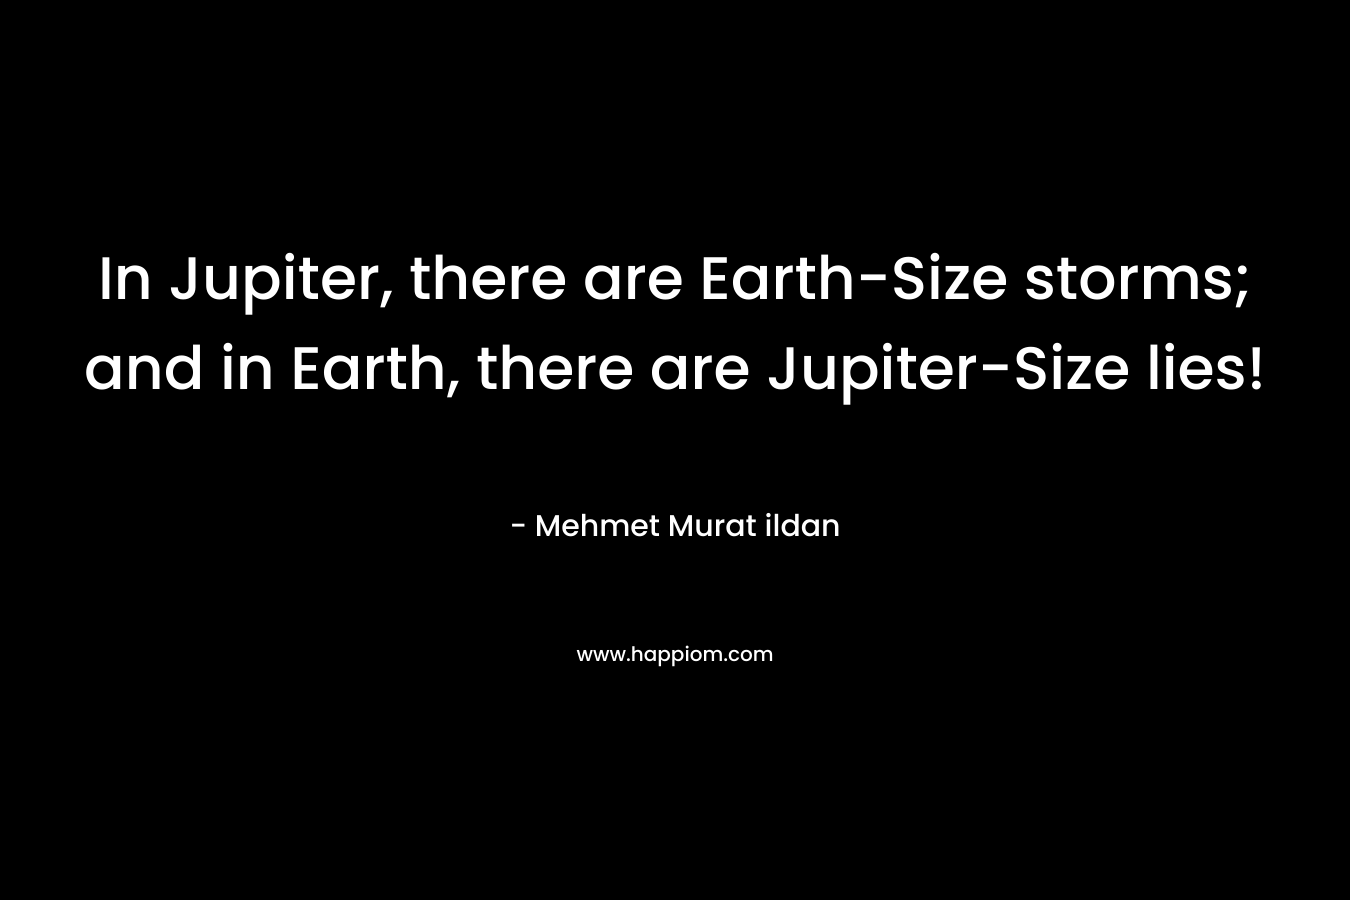 In Jupiter, there are Earth-Size storms; and in Earth, there are Jupiter-Size lies!